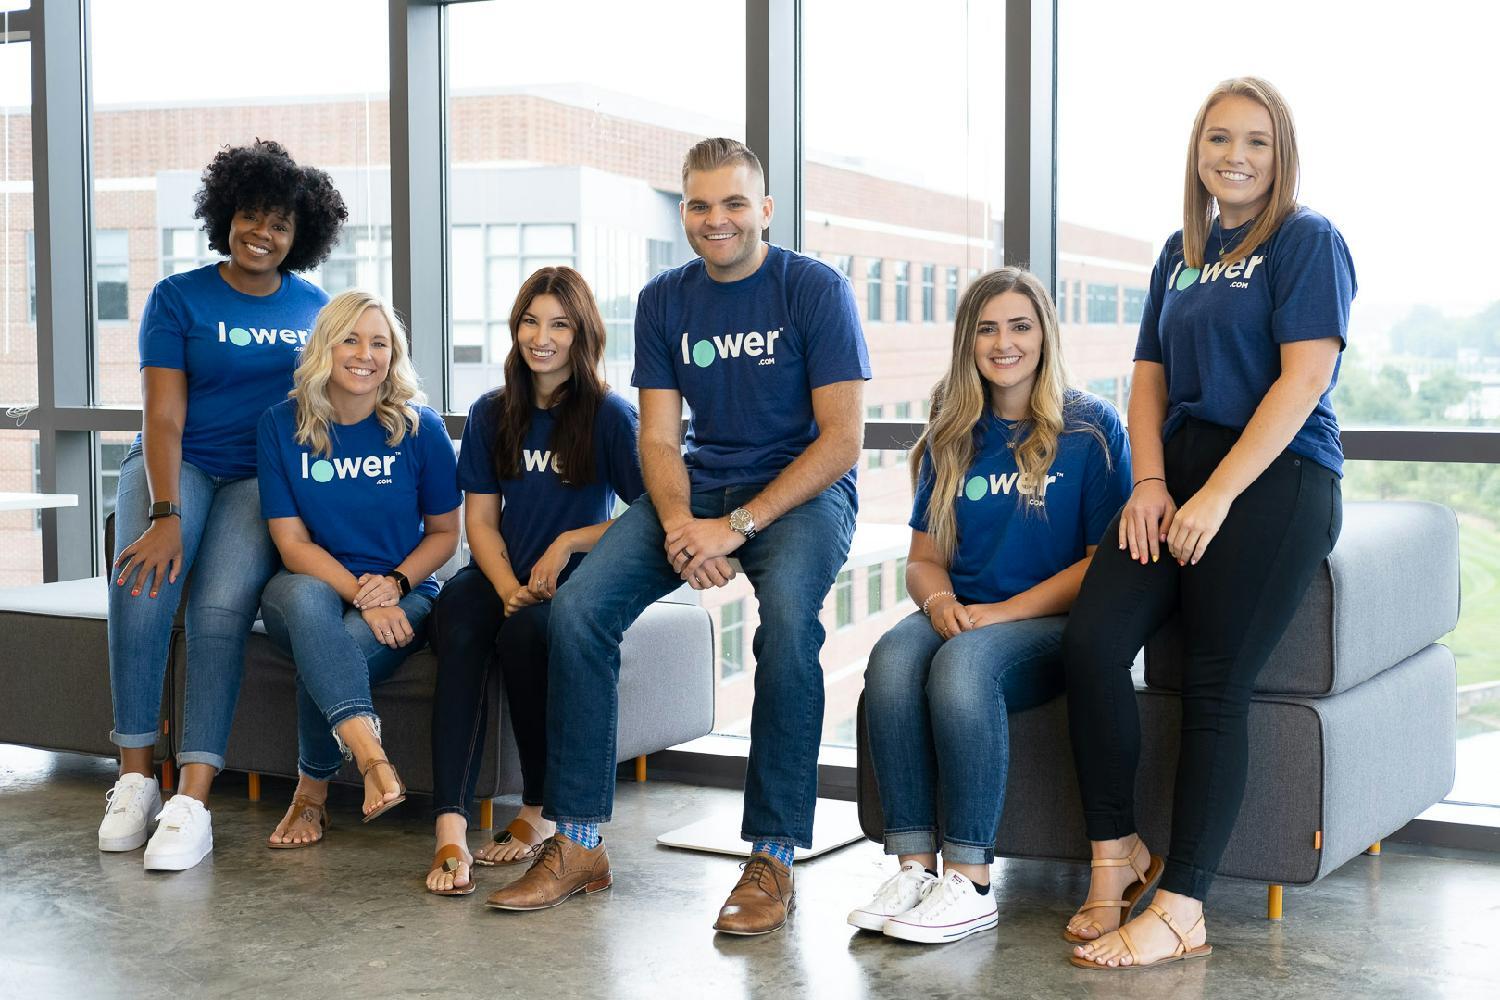 The Lower.com Talent Acquisition team wearing their Lower tee shirts.